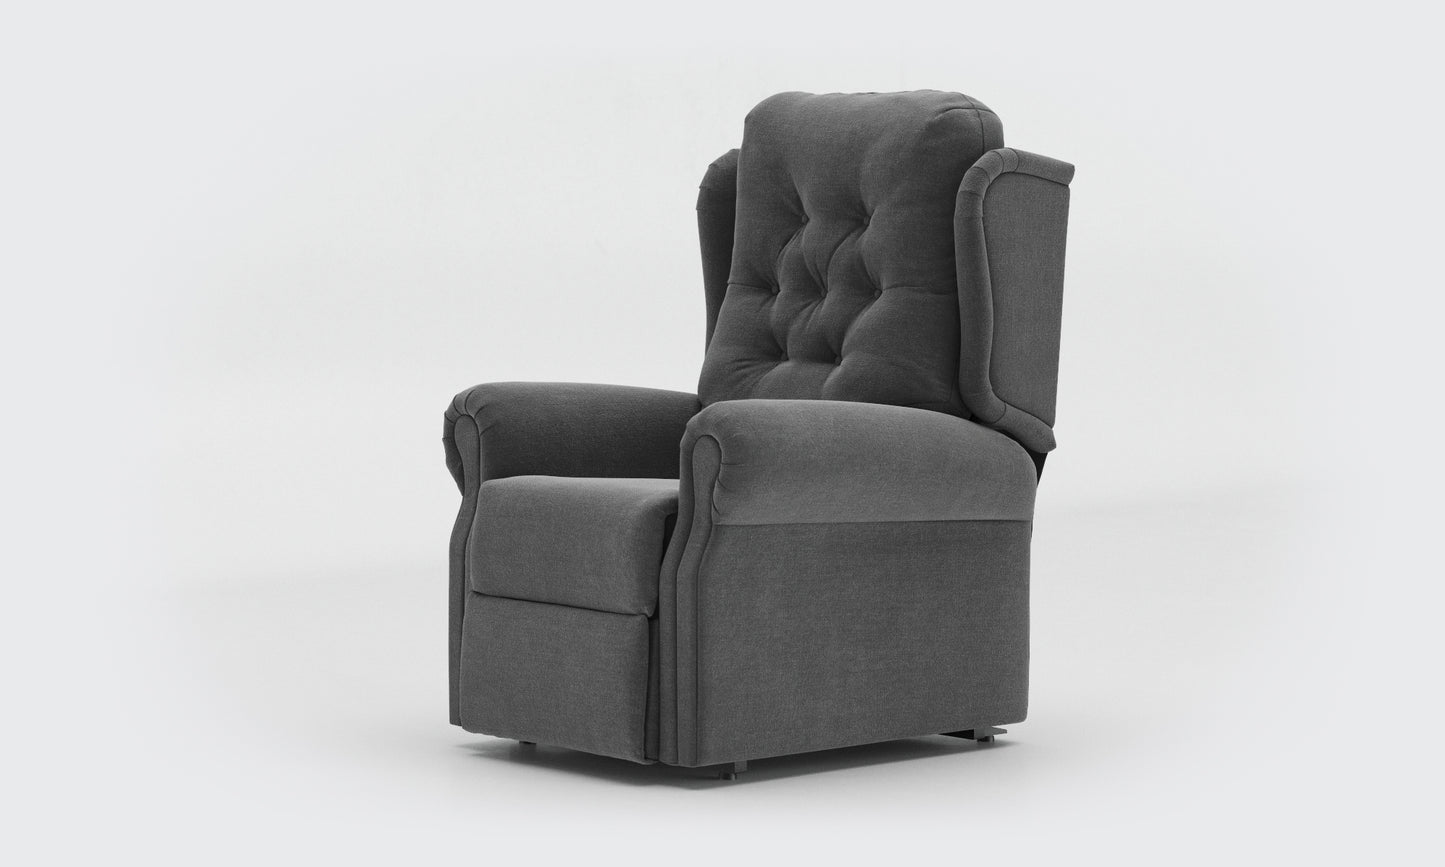 Talitha Riser Recliner Chair compact buttons fabric Anthracite